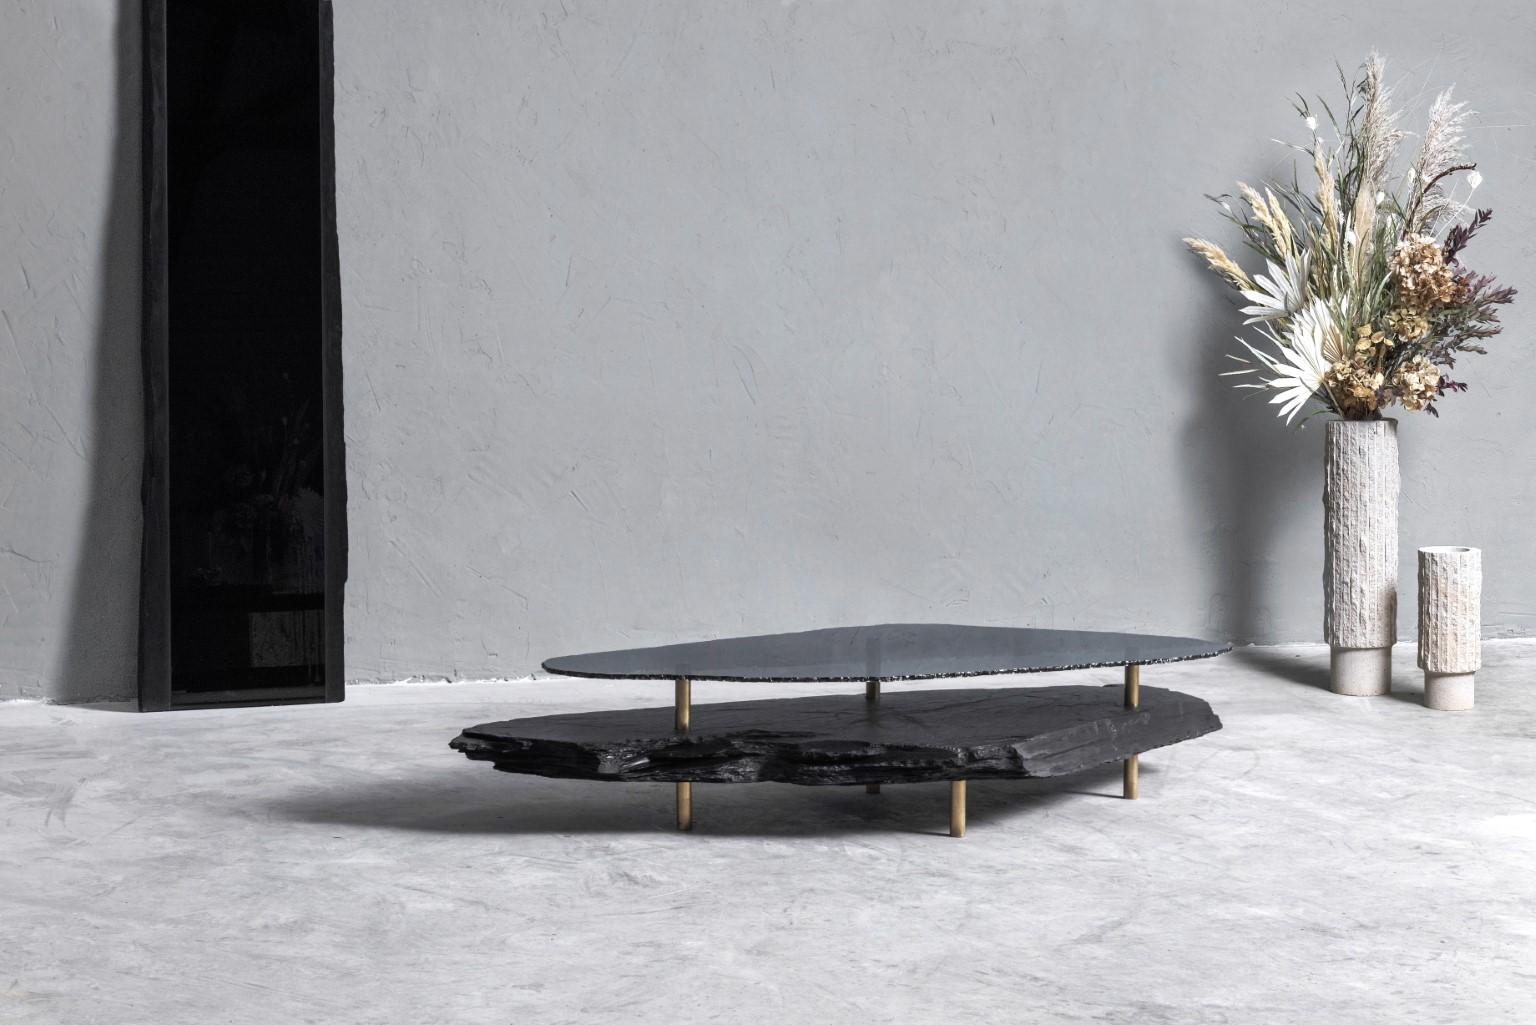 Unique slate sculpted coffee table by Frederic Saulou.
Hardie.
Coffee table.
Black slate, grey smocked mirror.
Measures: L 195 x W 80 x H 34 cm.
Unique piece : 1 / 1 
Signed and numbered.

